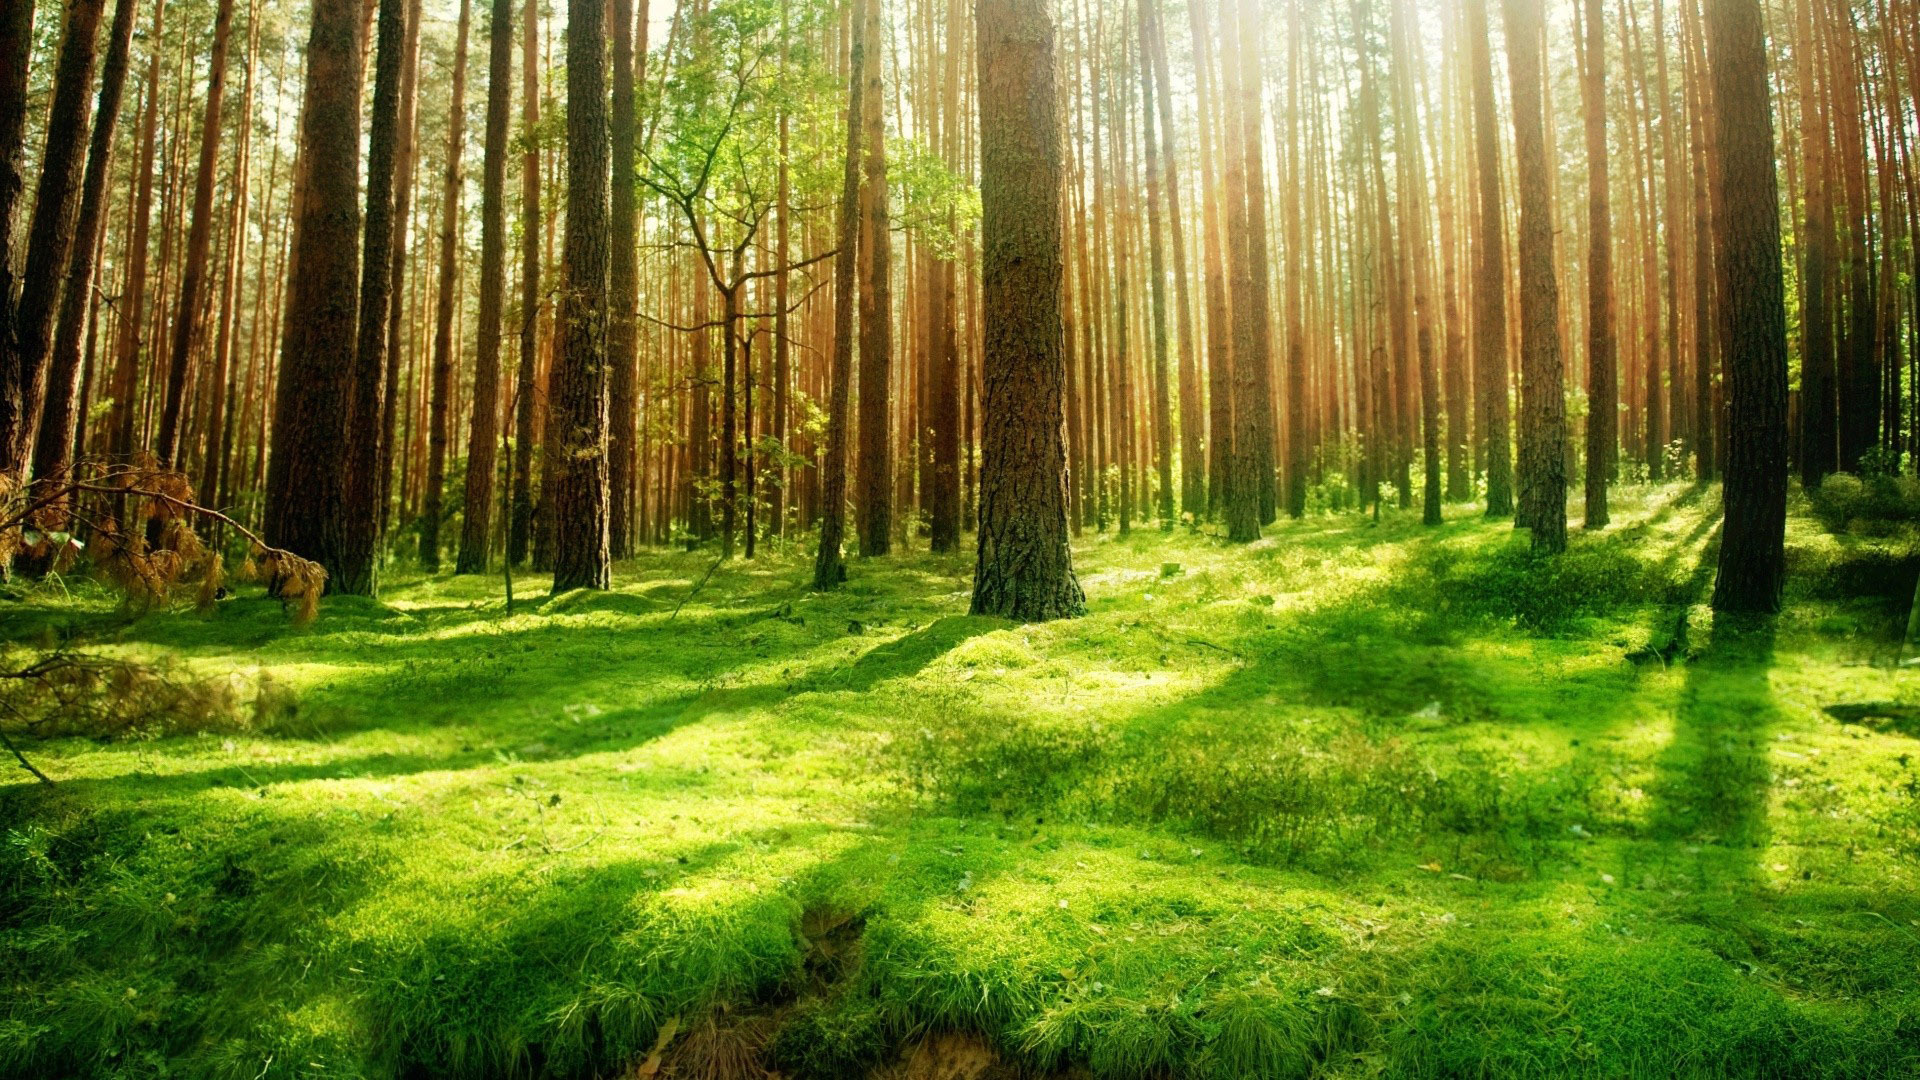 Forest Background HD Wallpapers 14661   HD Wallpapers Site 1920x1080